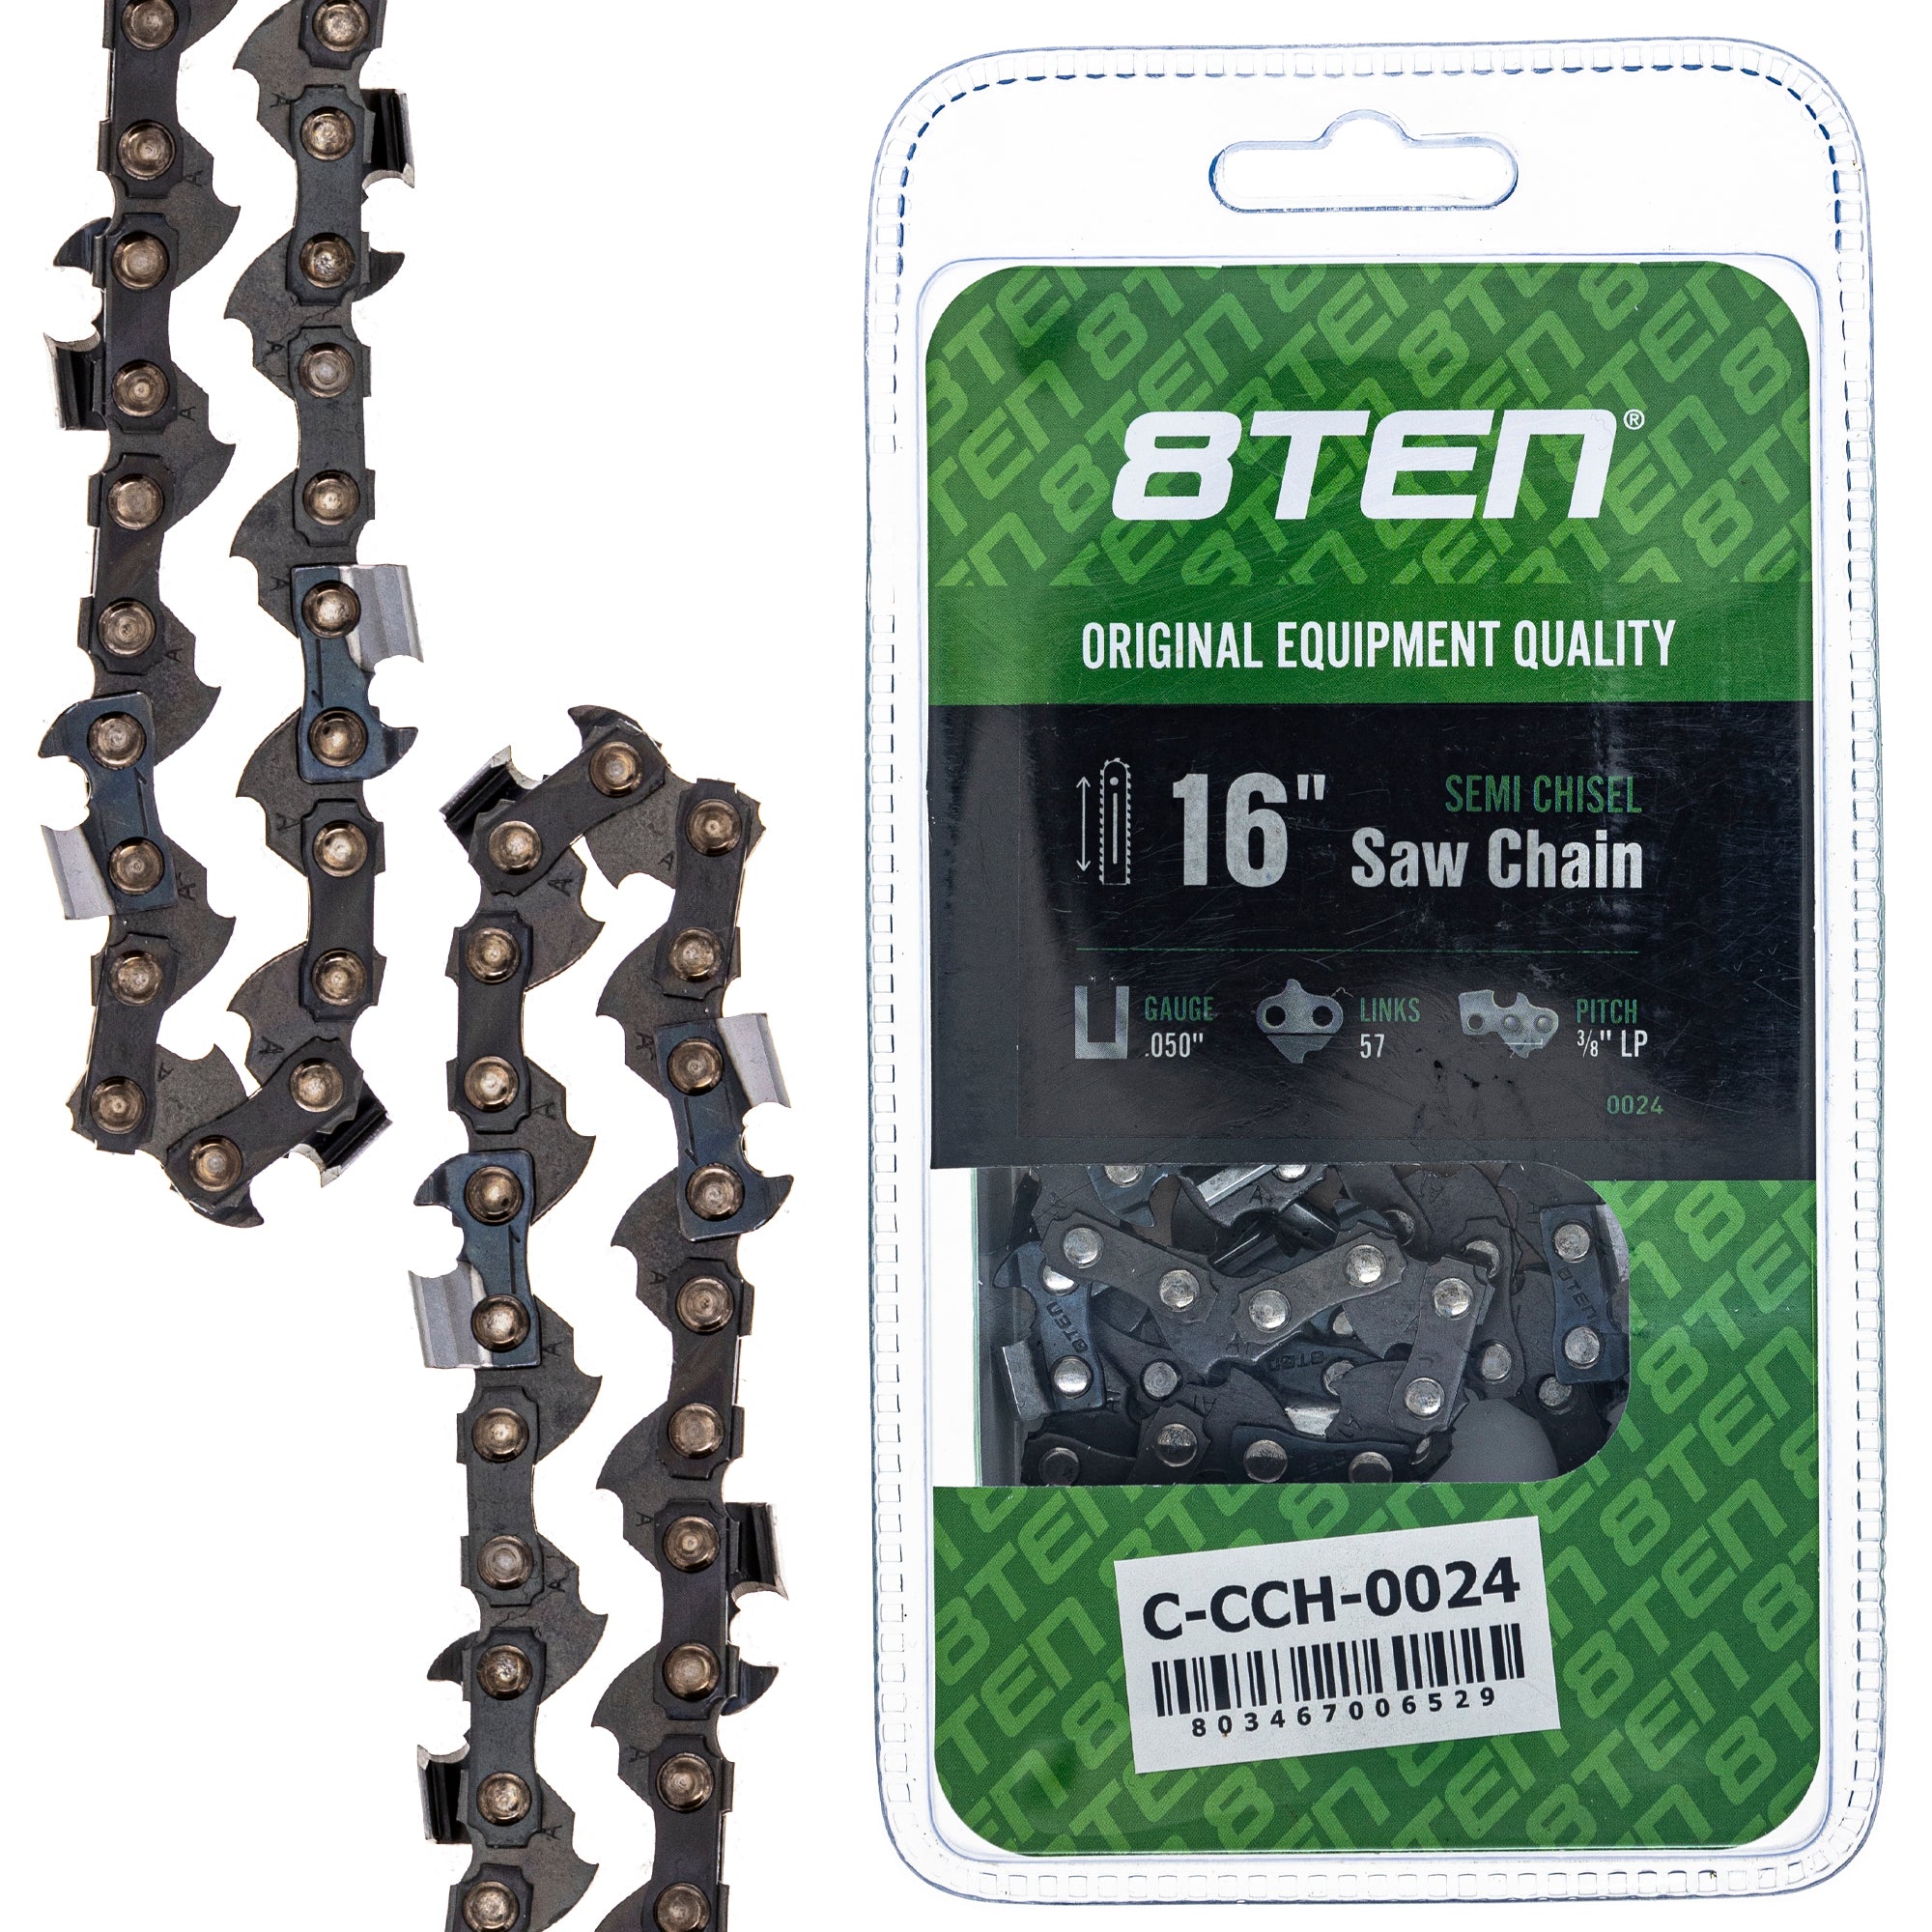 8TEN 810-CCC2246H Chain 4-Pack for zOTHER Windsor Stens Oregon GB